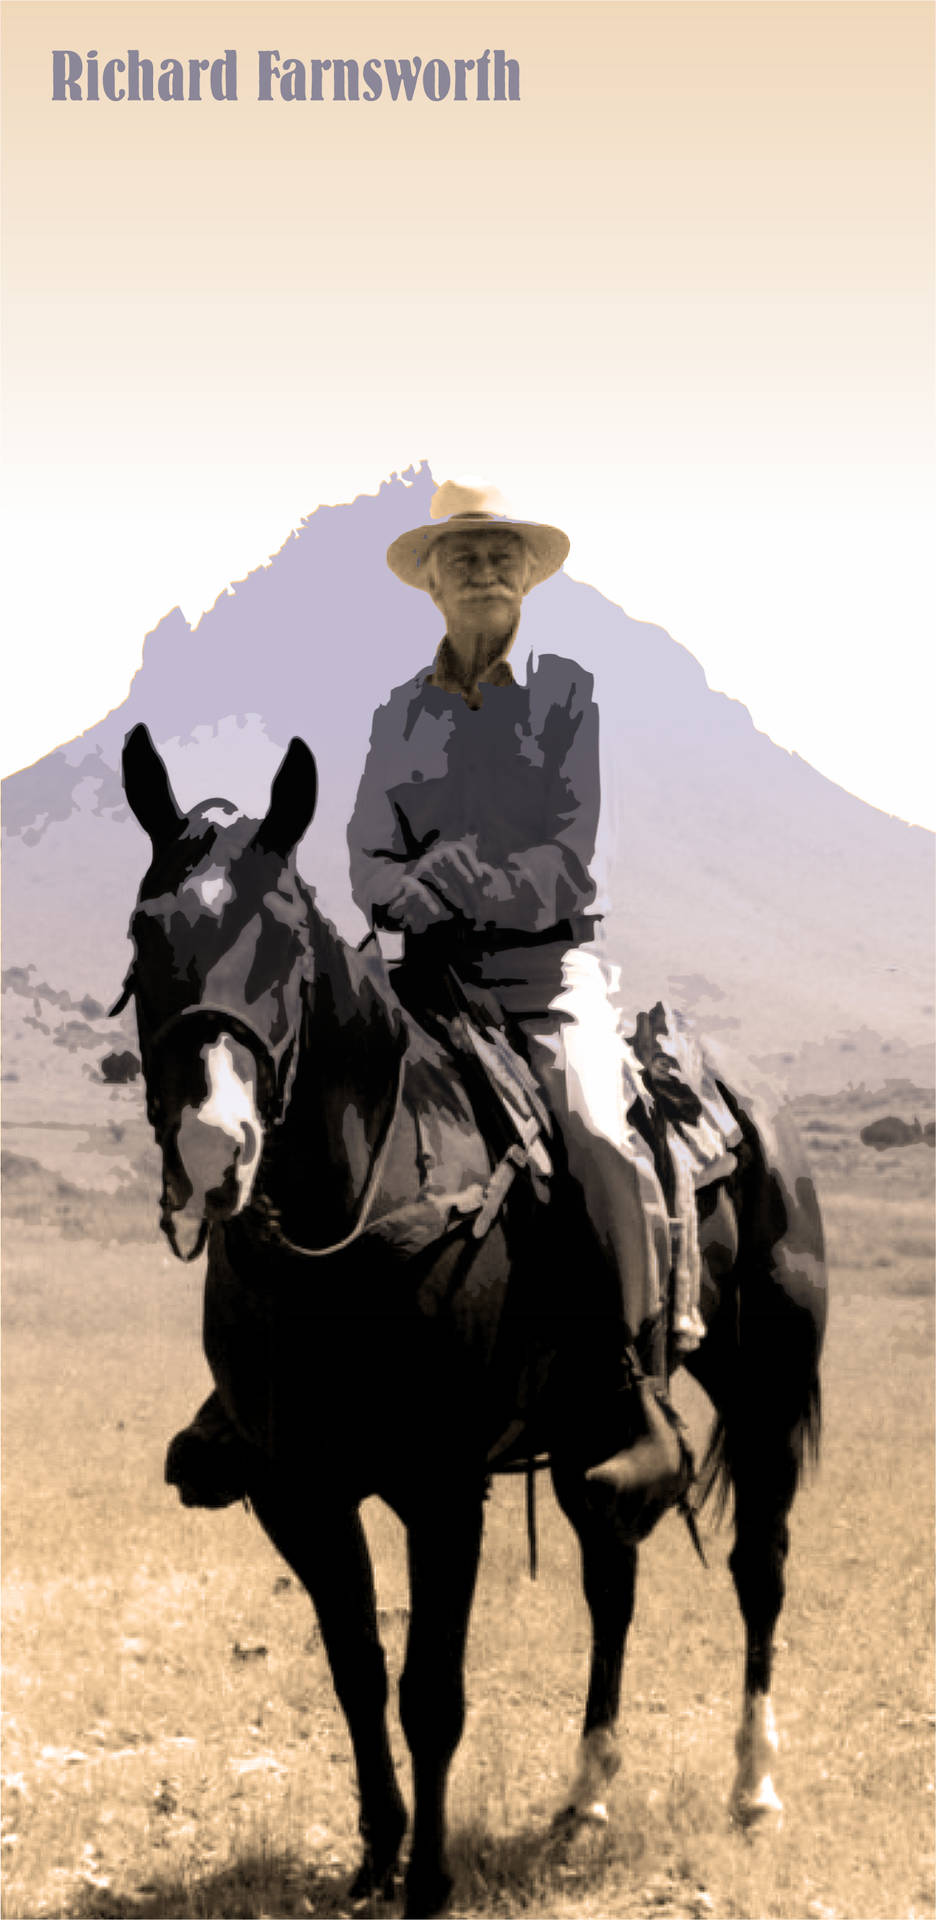 Richardfarnsworth Vintage Aesthetic Horse Cowboy Would Translate To 